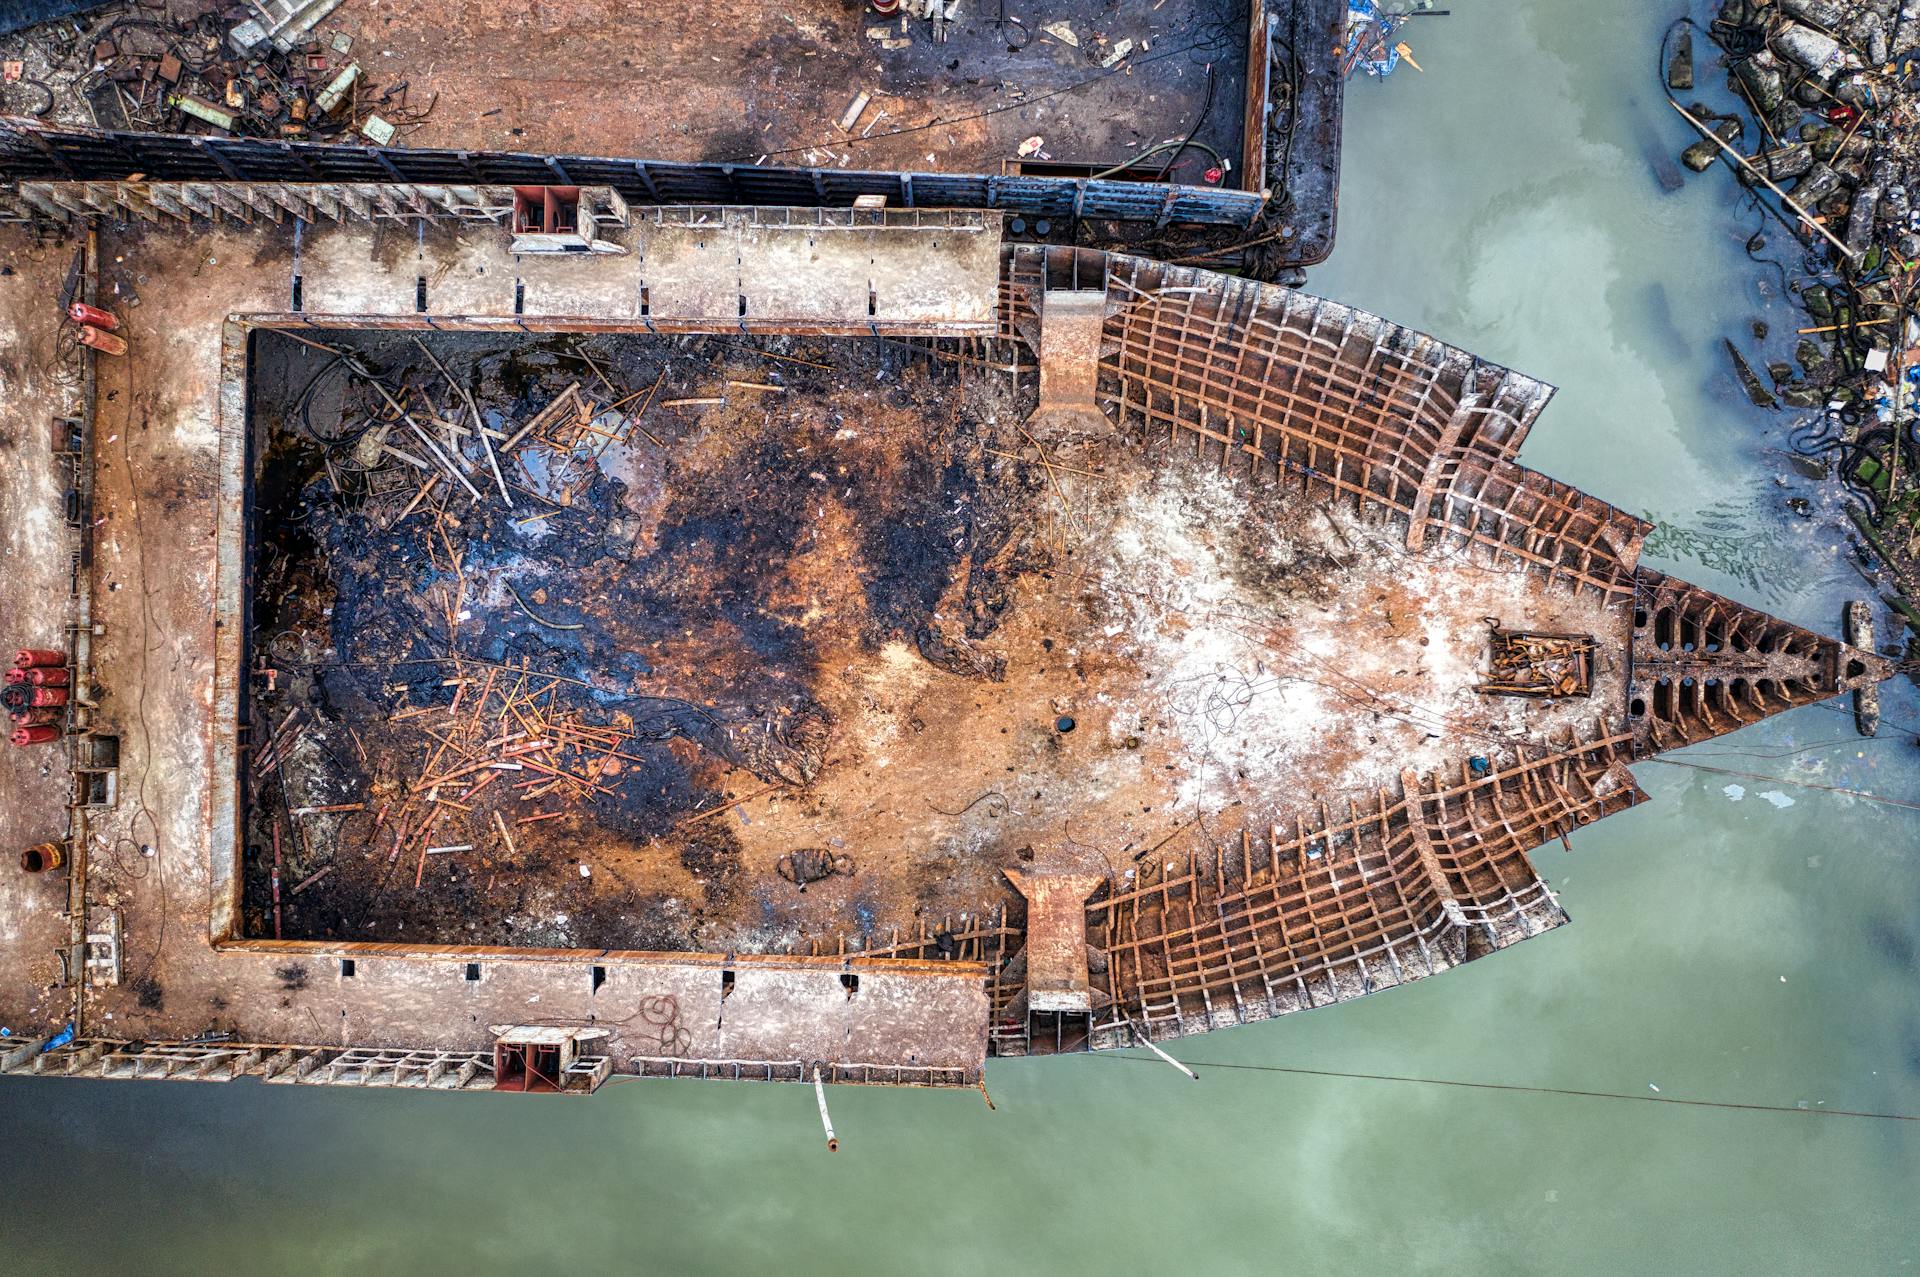 Drone view of old rusty ship floating in polluted water and moored in abandoned dirty port in daylight